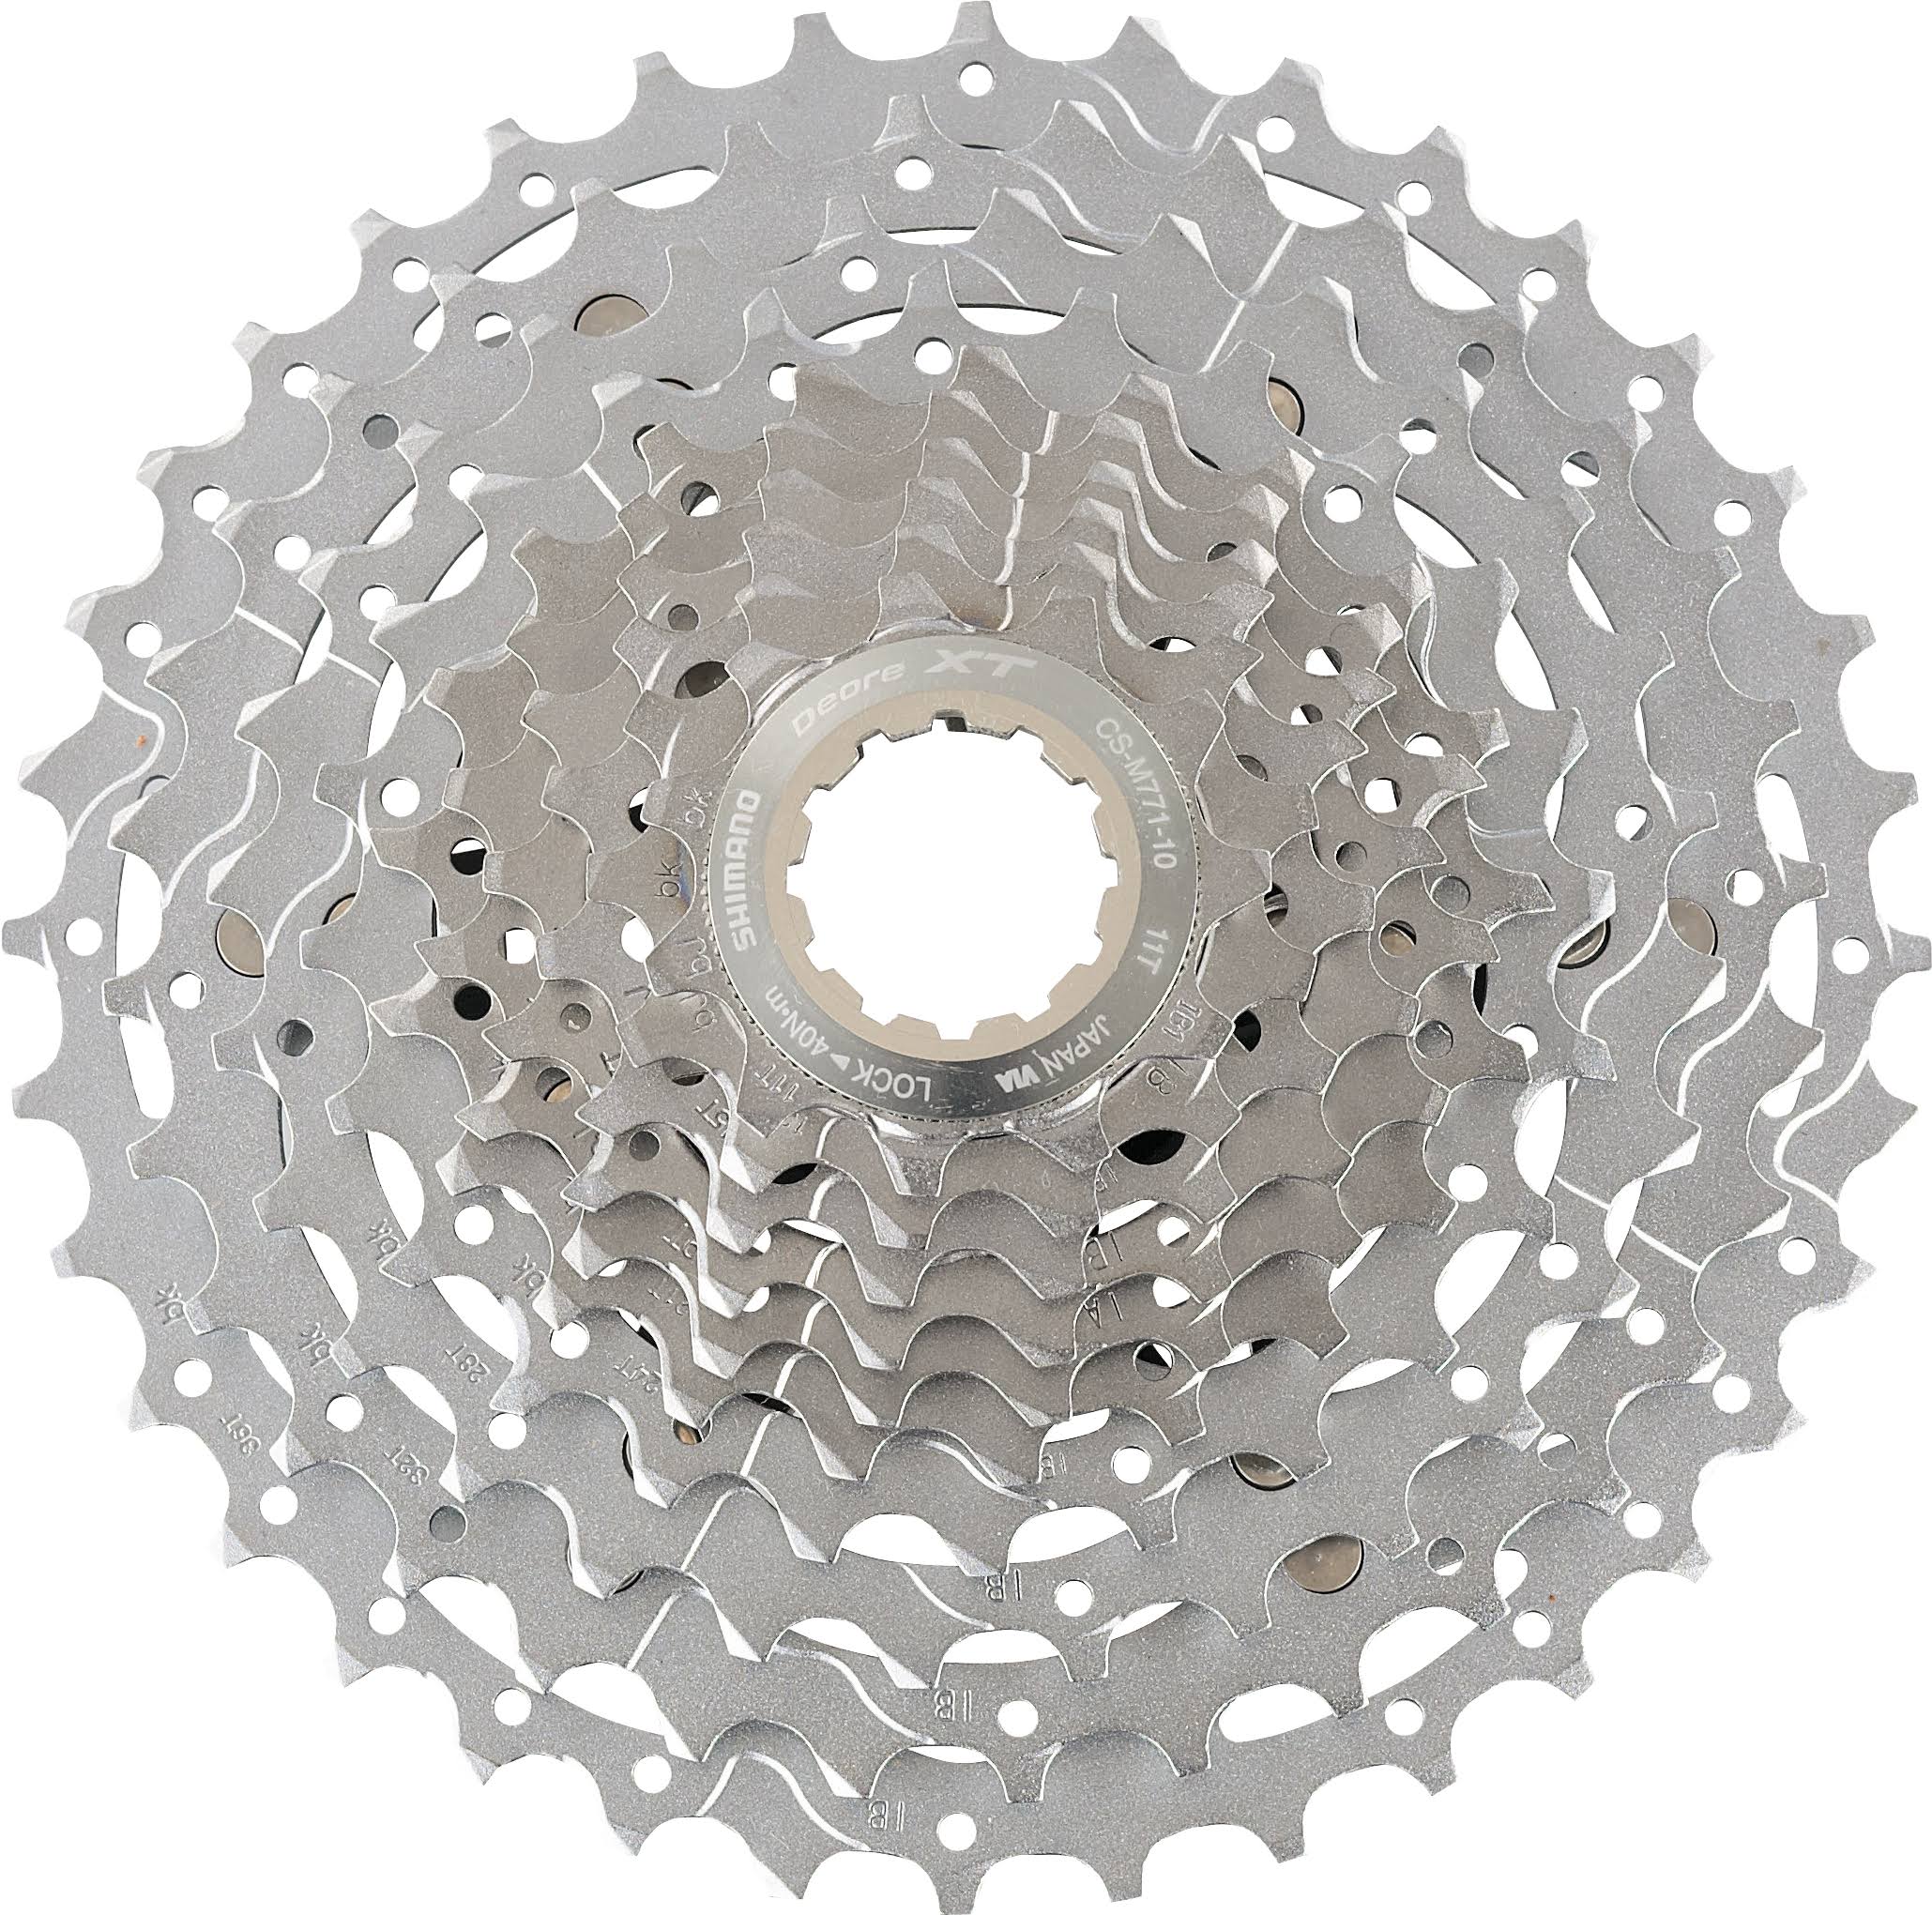 Shimano XT M771 11-36 Bicycle Cassette - 10 Speed, Silver